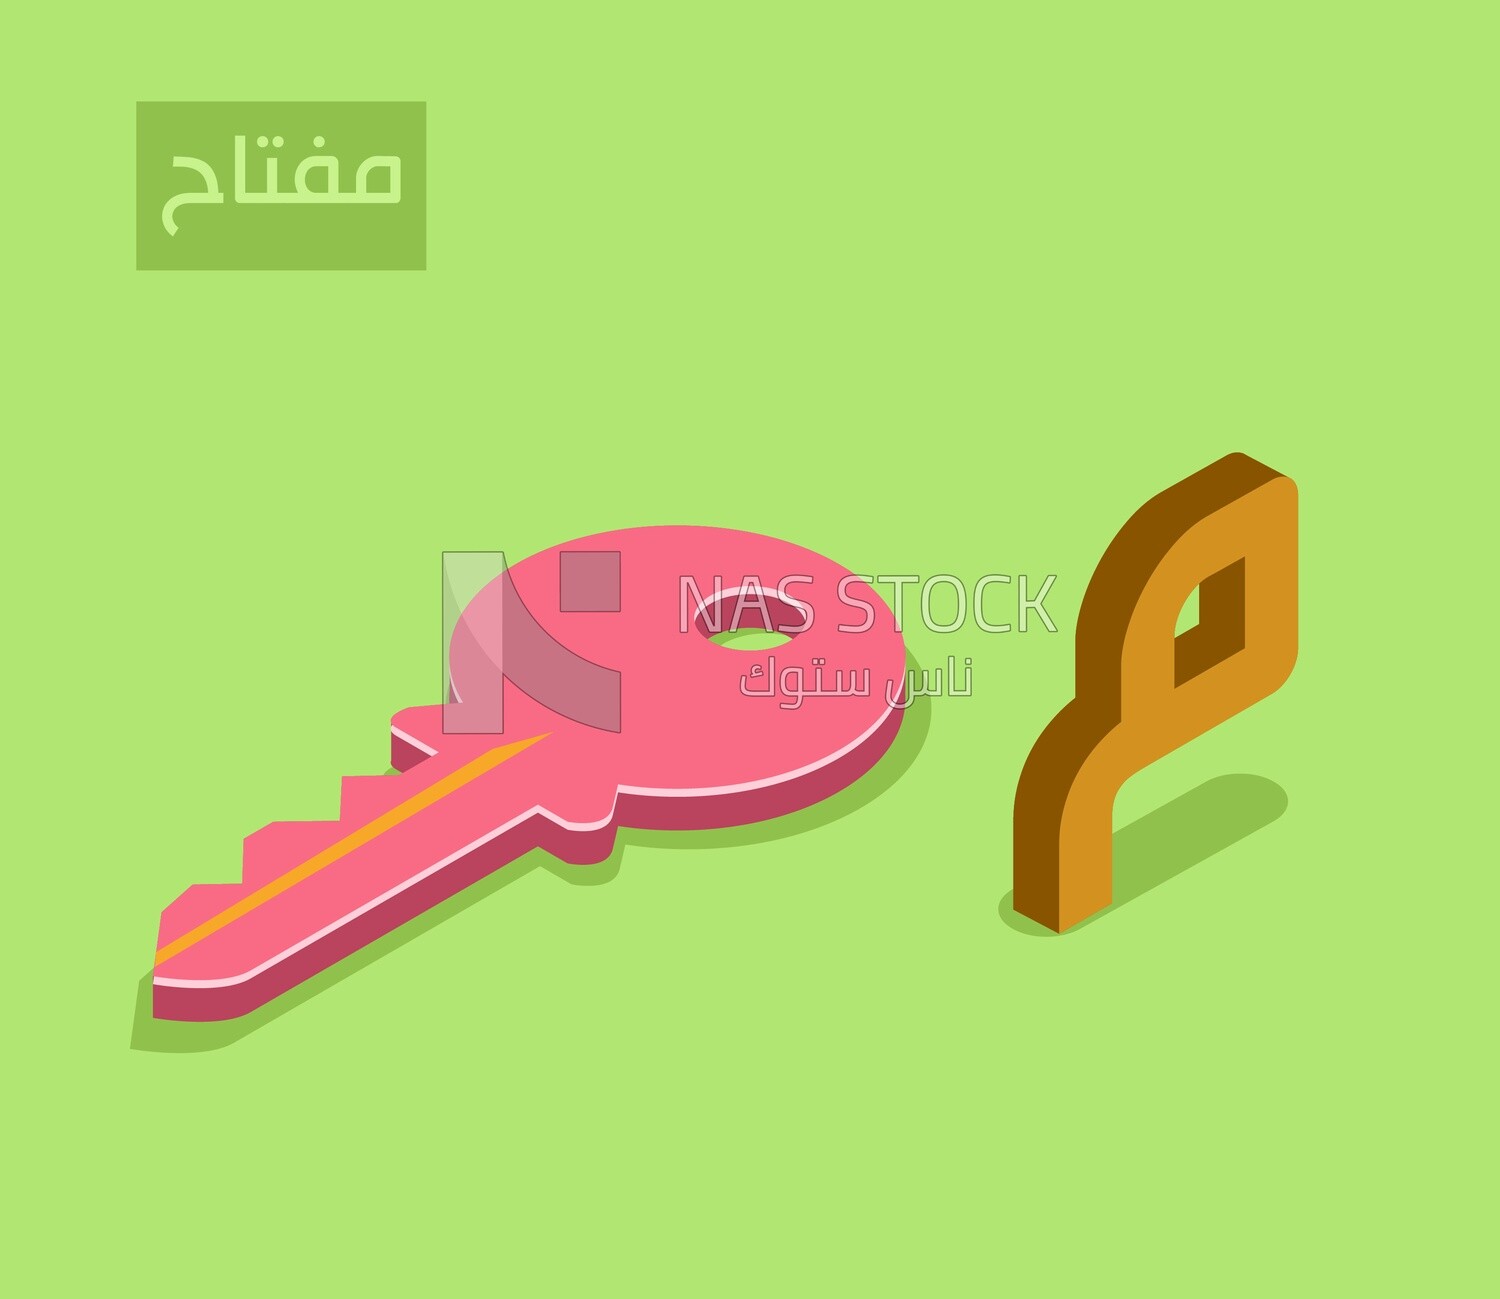 Isometric design of the Arabic alphabet,with the word &quot;key&quot;